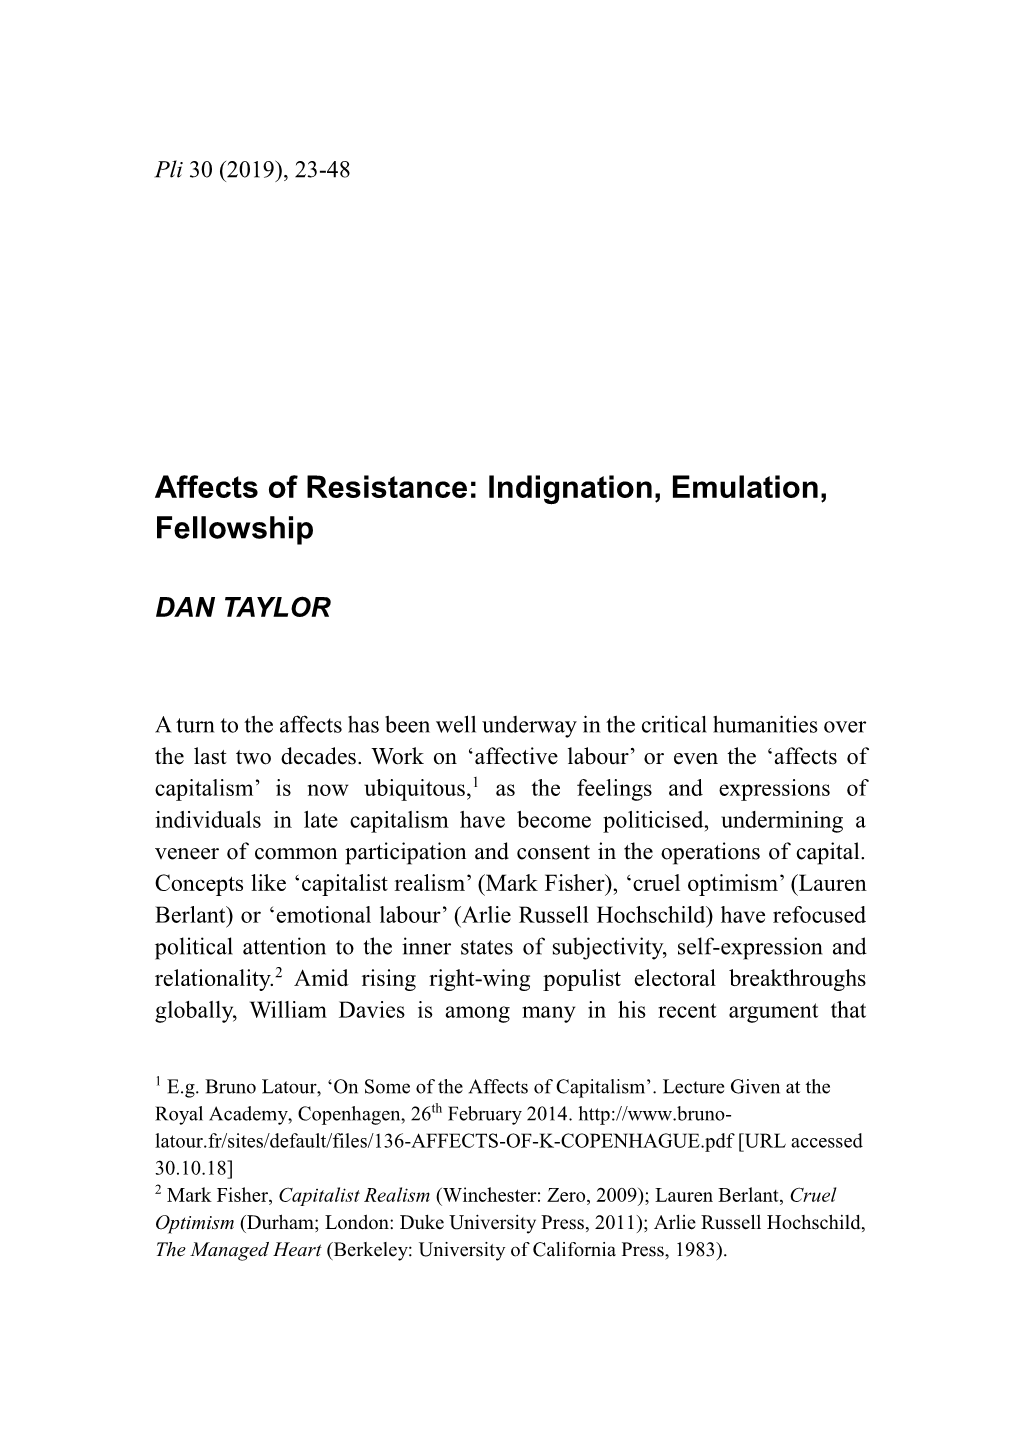 Affects of Resistance: Indignation, Emulation, Fellowship